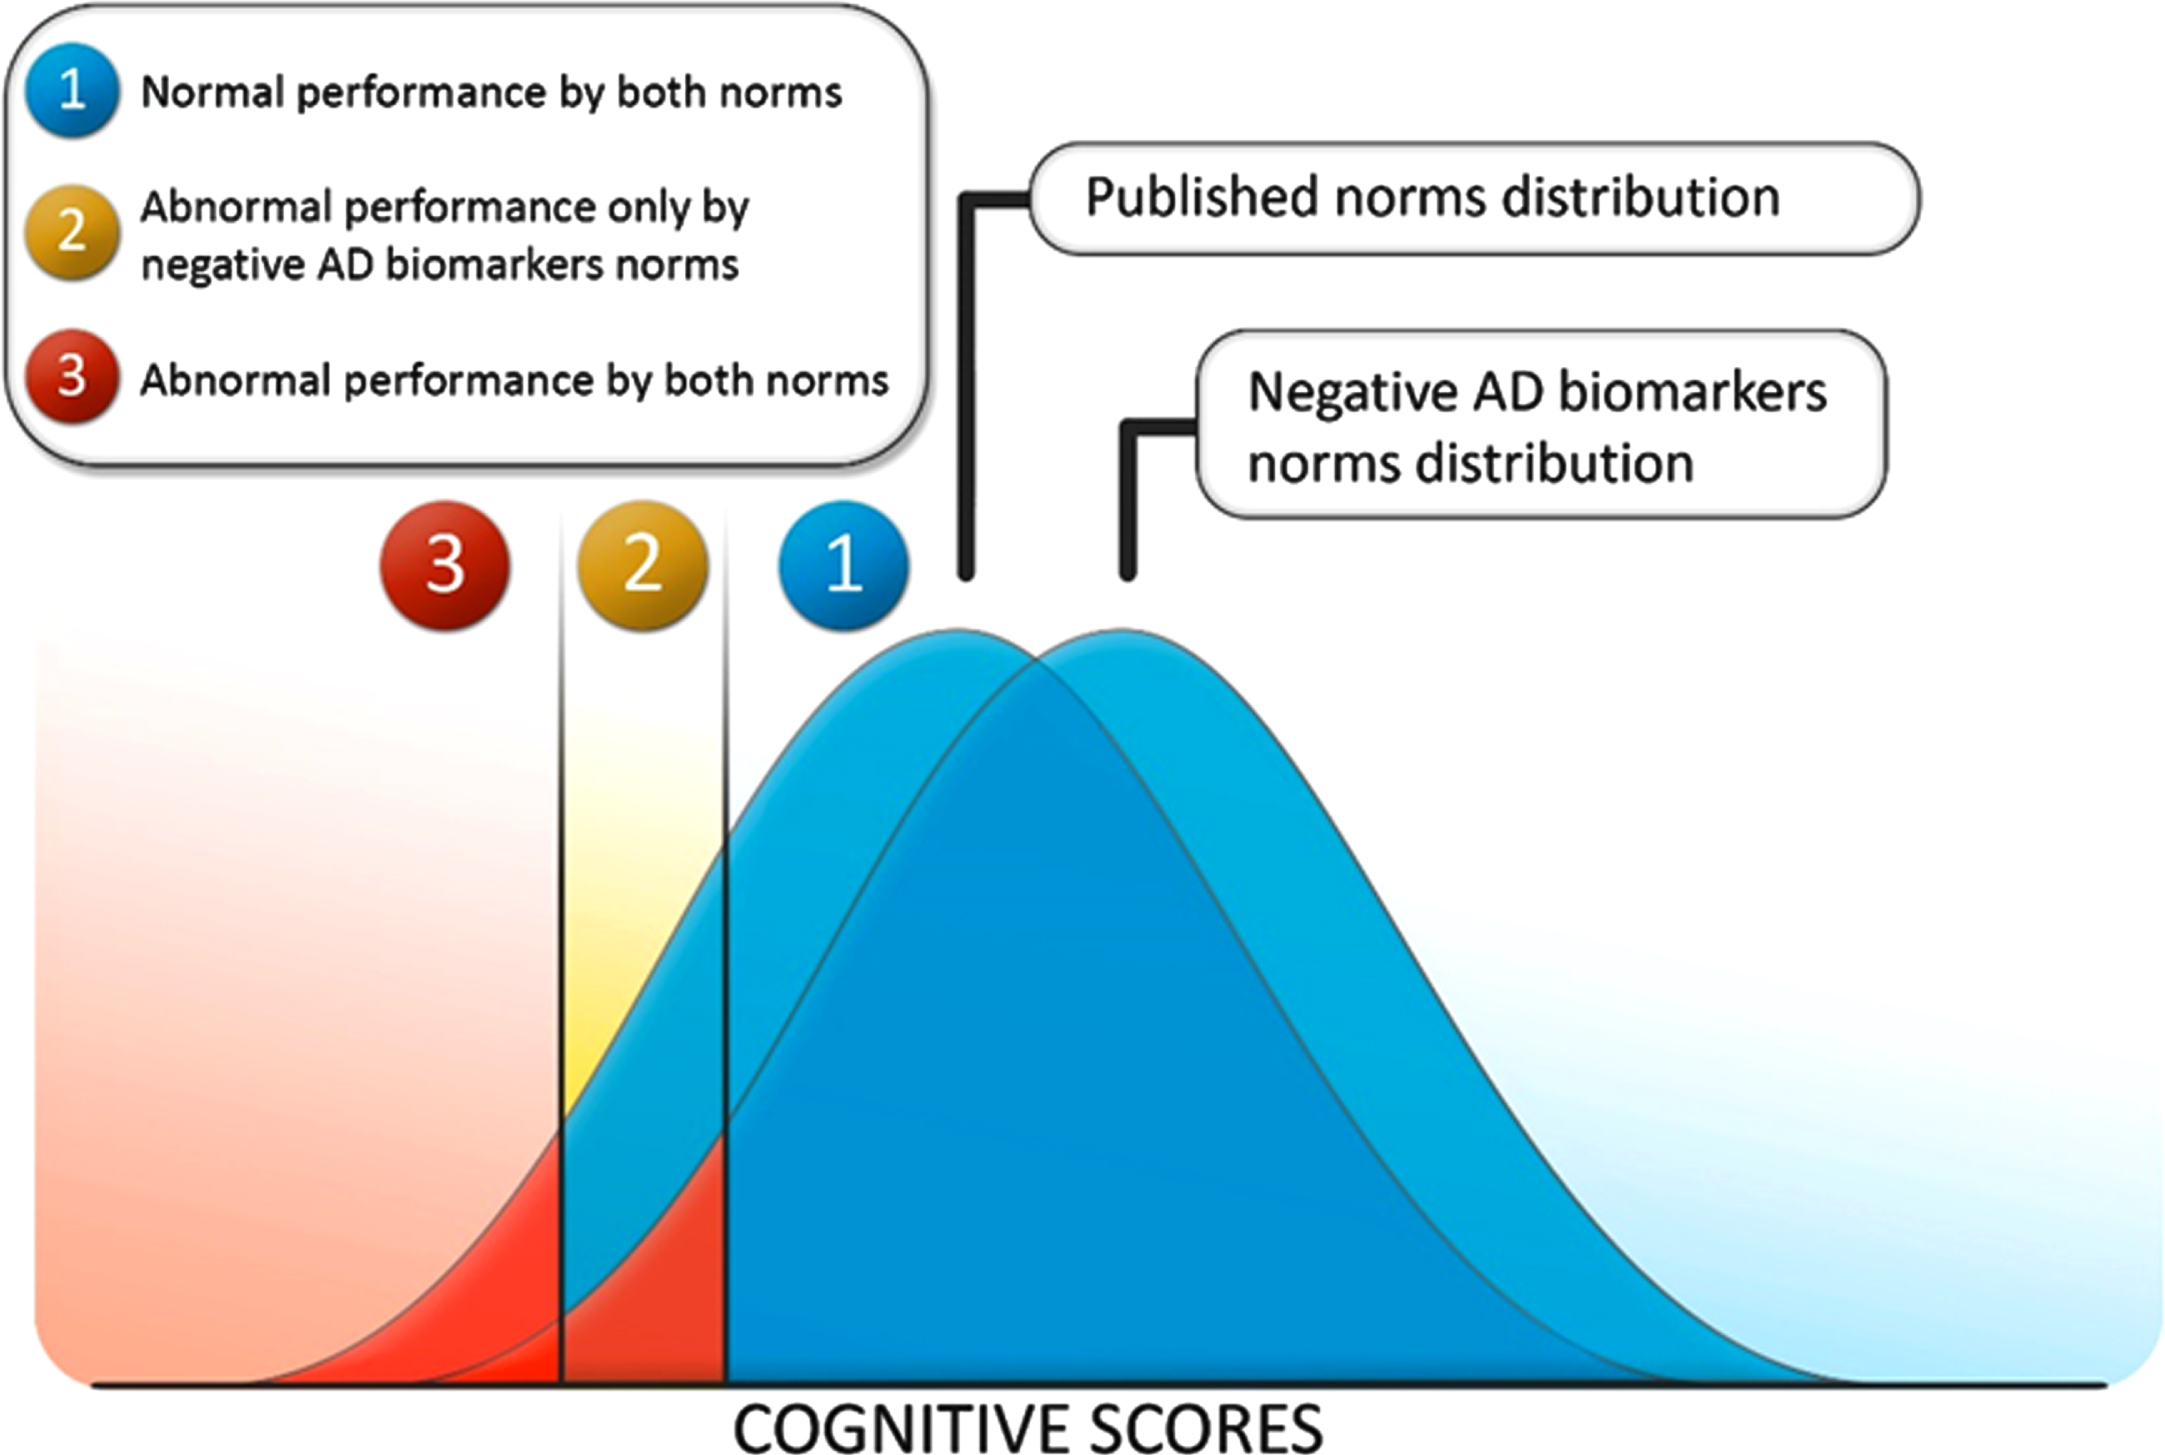 Classification of cognitive performance obtained by combining conventional published norms and negative AD biomarkers norms (adapted from Bos et al. (2018) [13]).